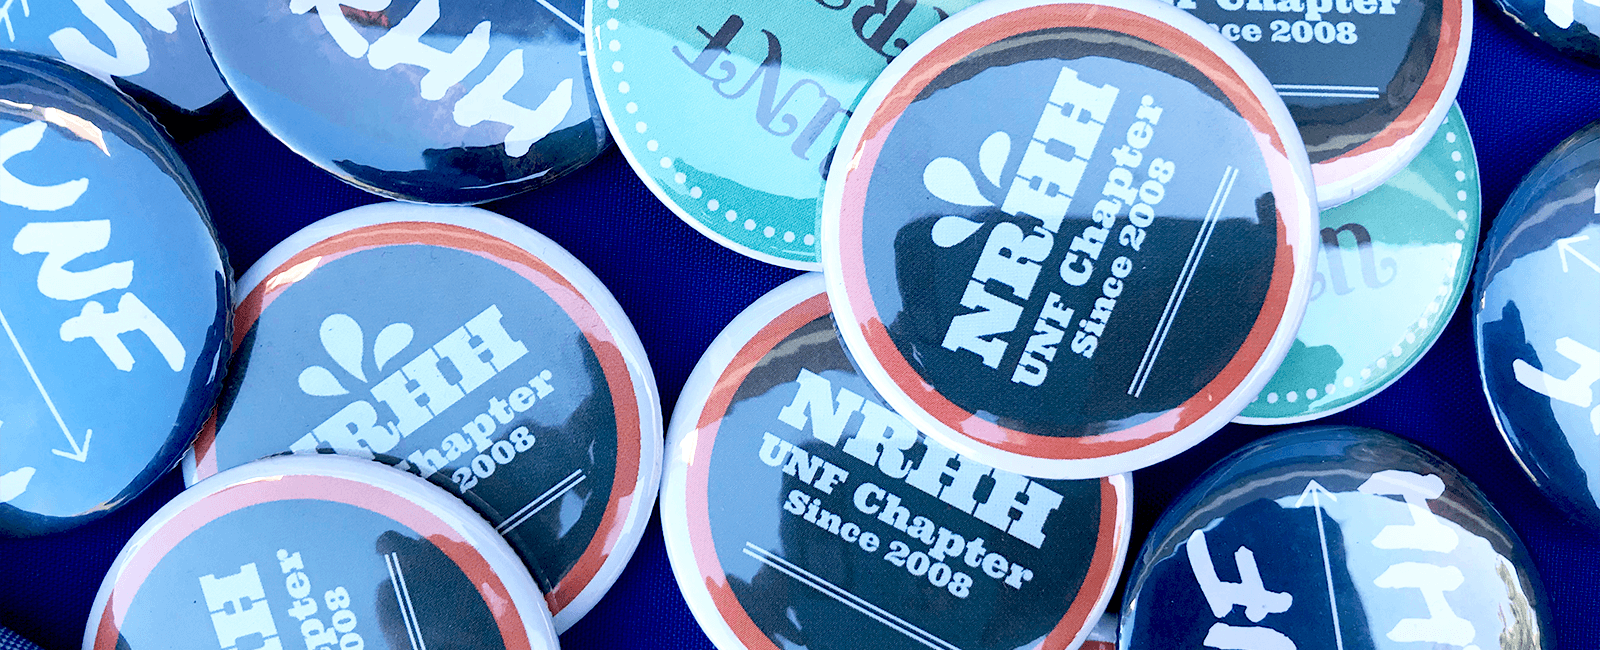 nrhh buttons